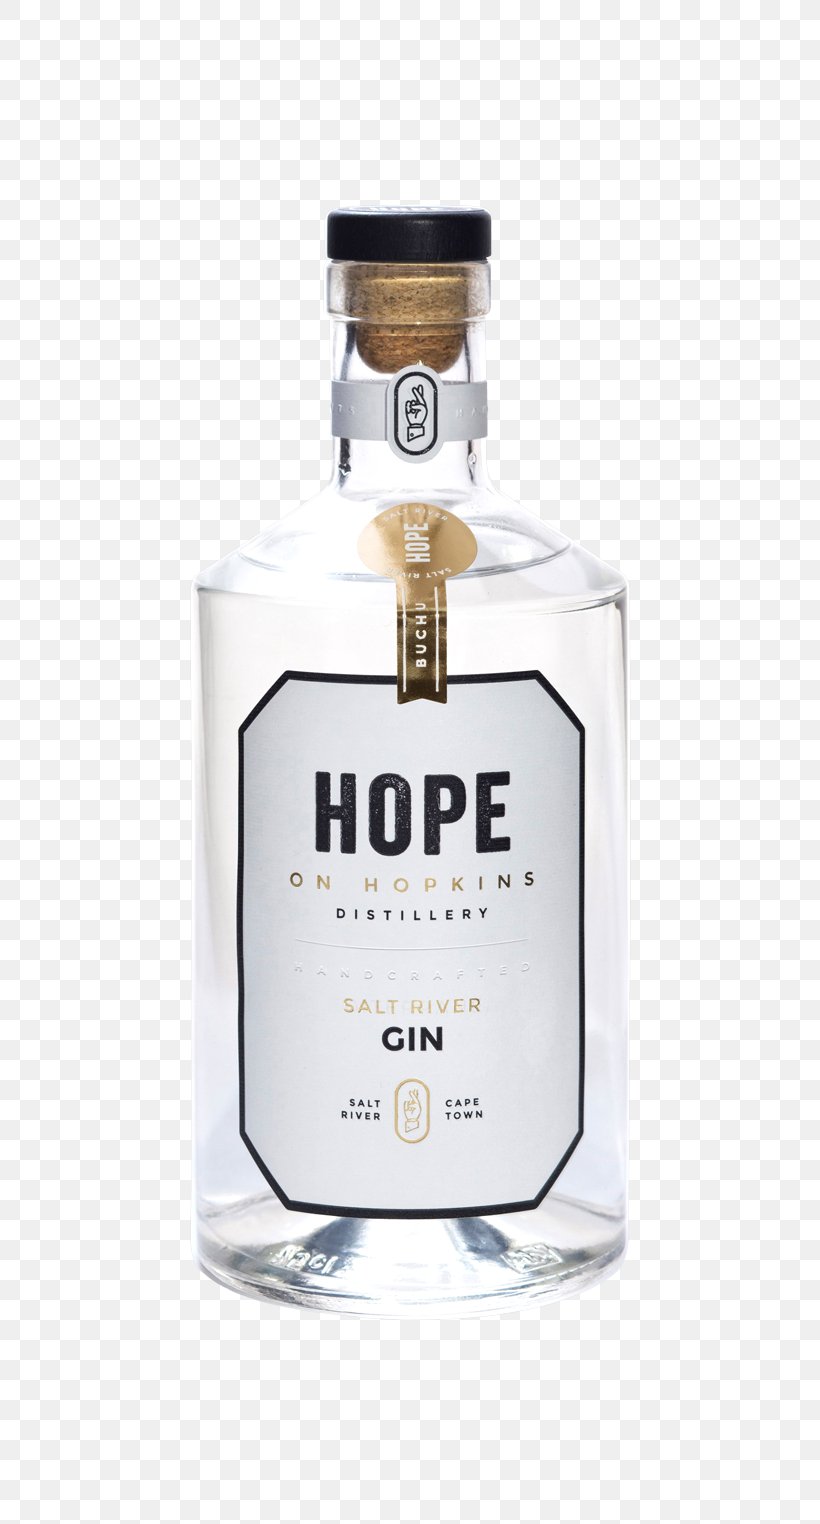 Hope On Hopkins Distillery, PNG, 600x1524px, Gin, Alcoholic Beverage, Alcoholic Beverages, Botanicals, Distillation Download Free